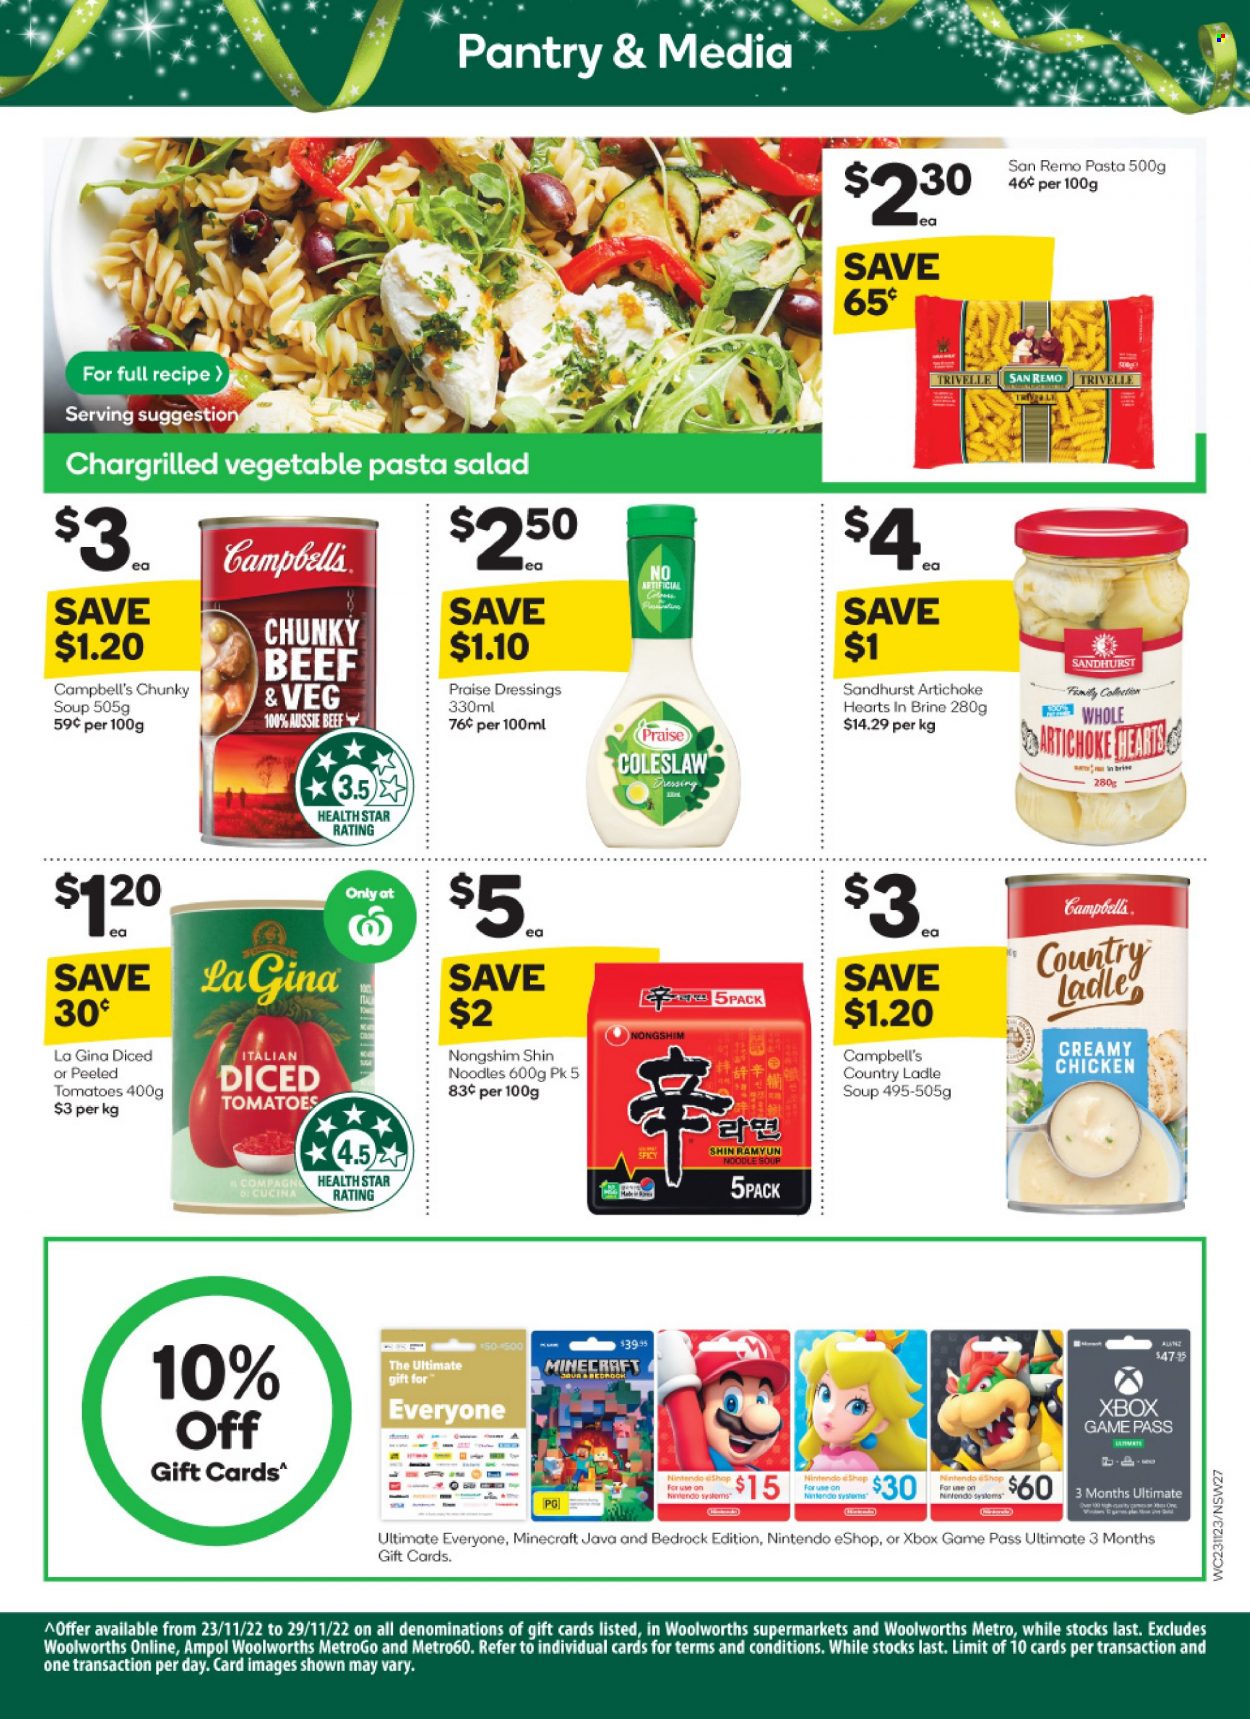 thumbnail - Woolworths Catalogue - 23 Nov 2022 - 29 Nov 2022 - Sales products - tomatoes, Campbell's, coleslaw, soup, pasta, noodles cup, noodles, pasta salad, diced tomatoes, dressing, coleslaw dressing, Aussie. Page 27.